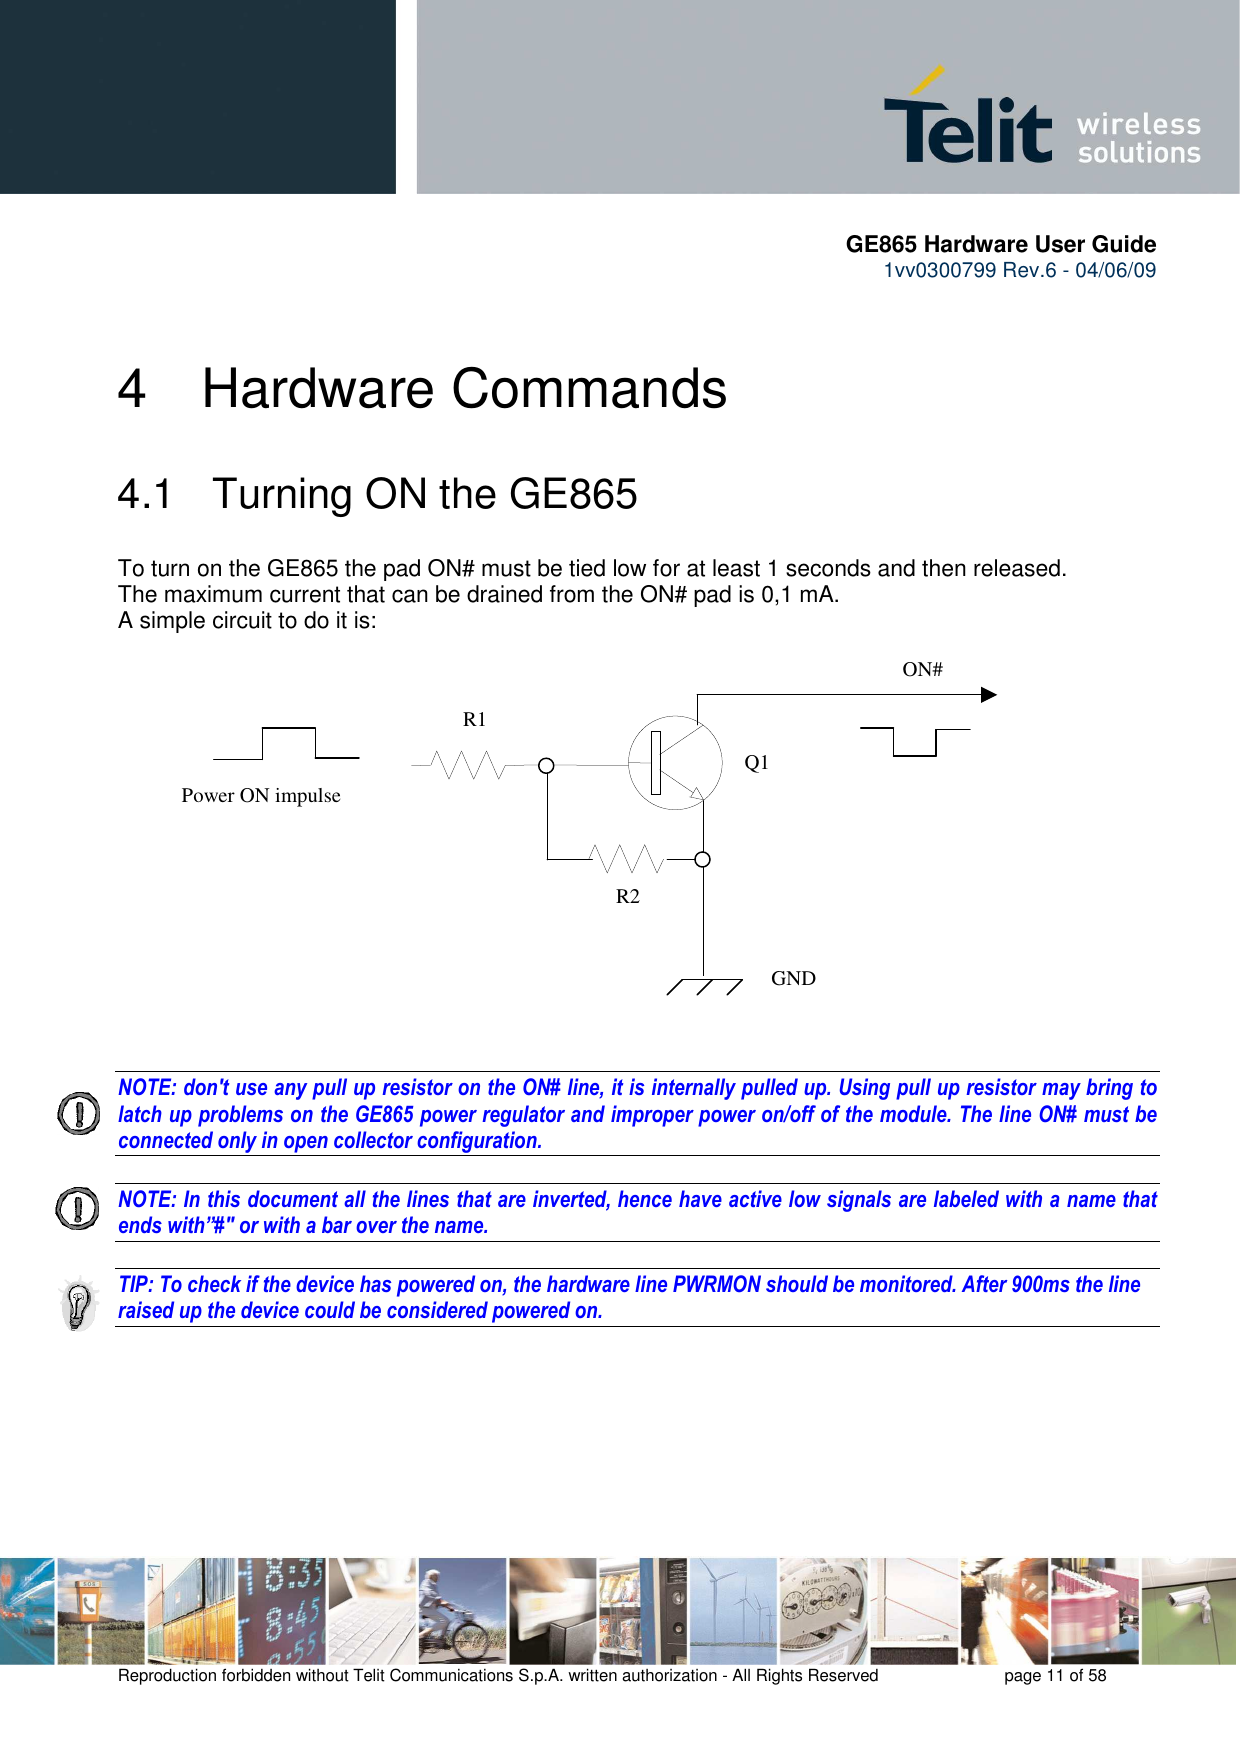       GE865 Hardware User Guide 1vv0300799 Rev.6 - 04/06/09      Reproduction forbidden without Telit Communications S.p.A. written authorization - All Rights Reserved    page 11 of 58  4  Hardware Commands 4.1   Turning ON the GE865 To turn on the GE865 the pad ON# must be tied low for at least 1 seconds and then released. The maximum current that can be drained from the ON# pad is 0,1 mA. A simple circuit to do it is:   NOTE: don&apos;t use any pull up resistor on the ON# line, it is internally pulled up. Using pull up resistor may bring to latch up problems on the GE865 power regulator and improper power on/off of the module. The line ON# must be connected only in open collector configuration.  NOTE: In this document all the lines that are inverted, hence have active low signals are labeled with a name that ends with”#&quot; or with a bar over the name.  TIP: To check if the device has powered on, the hardware line PWRMON should be monitored. After 900ms the line raised up the device could be considered powered on.     ON#Power ON impulse  GNDR1R2Q1